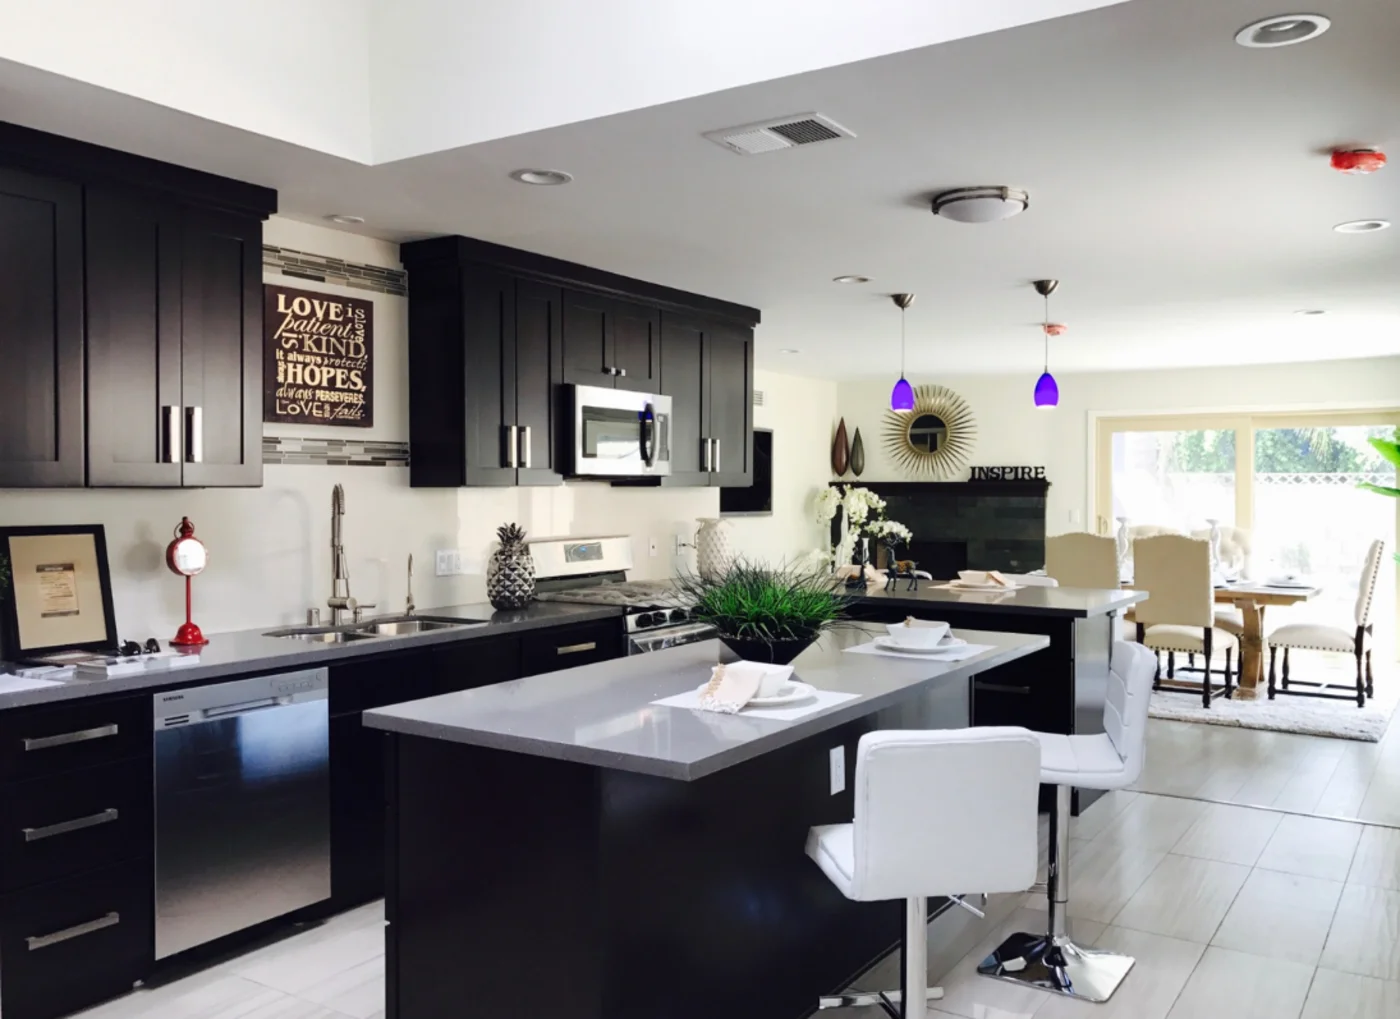 How to add value to your home. An open-concept kitchen with dark furniture.